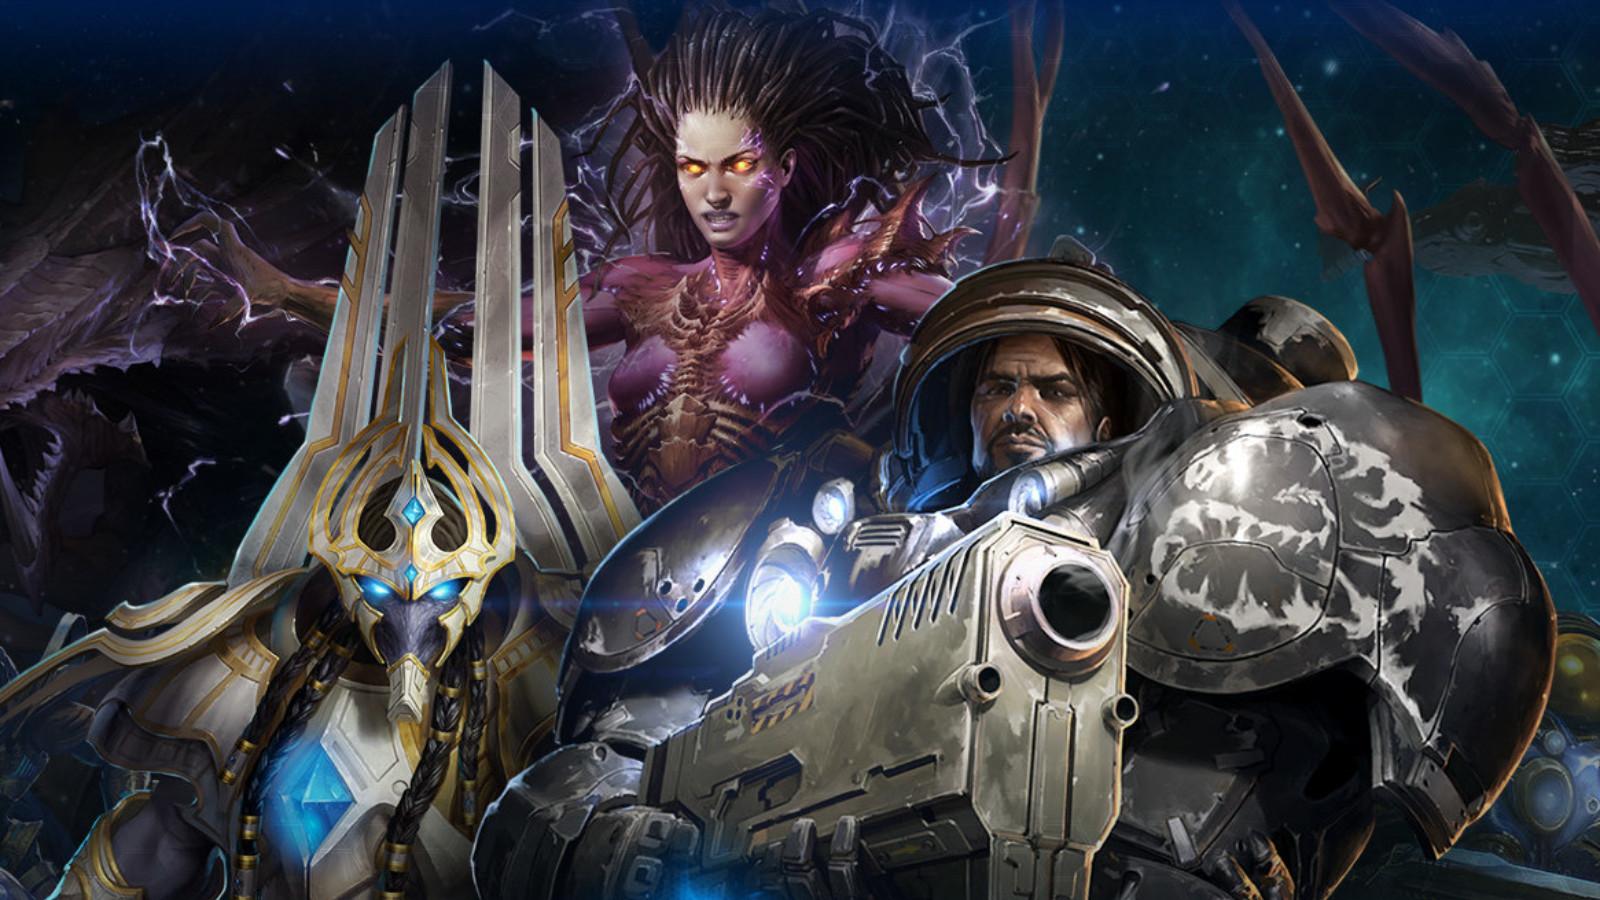 Phil Spencer “excited” to work with Blizzard to bring StarCraft to